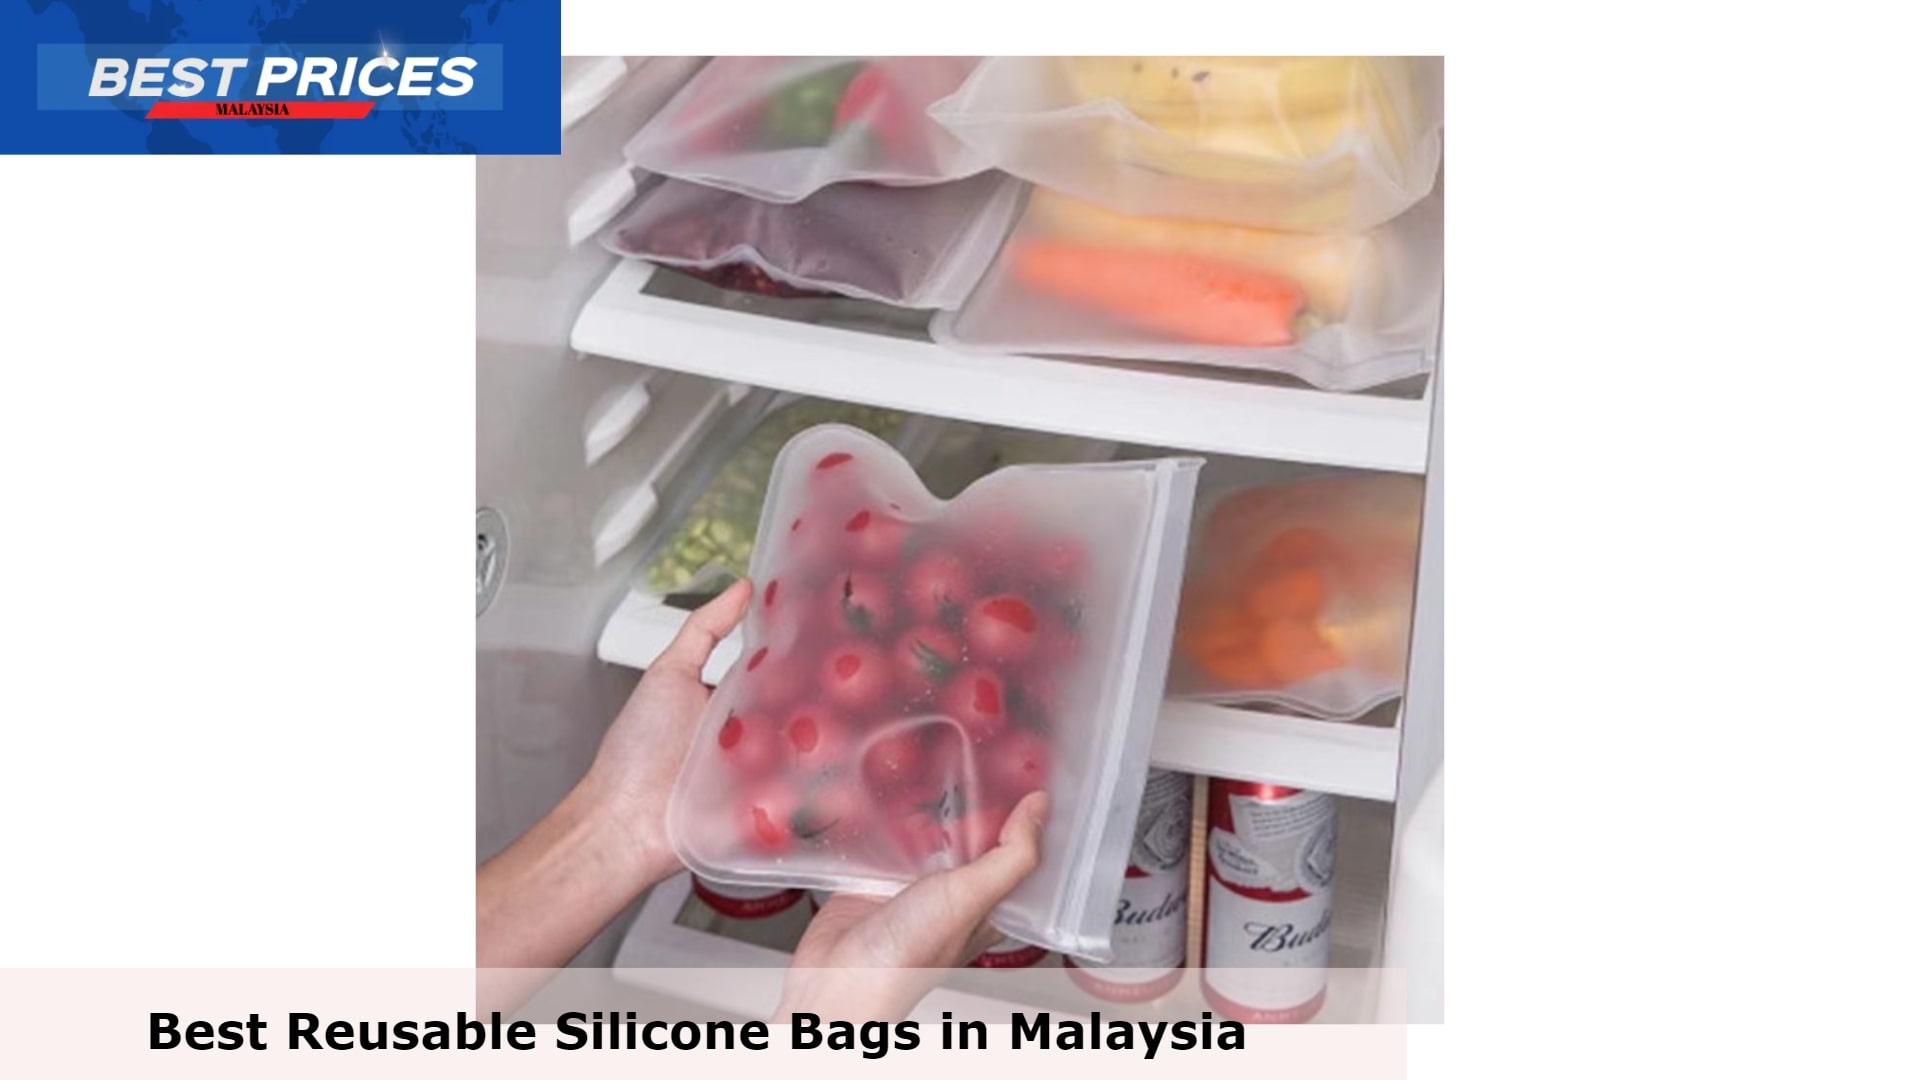 W House’s Reusable Silicone Food Storage Bags - Reusable Silicone Bags Malaysia, Reusable Snack Bag, Reusable Sandwich Bag, Reusable Storage Bag, Can you reuse silicone bags?, How do you use reusable silicone bags?, Why are Stasher bags so expensive?, Are silicone bags safe?, gourmet reusable silicone bags, reusable silicone bags amazon, reusable silicone bags target, reusable silicone bags Malaysia, reusable silicone bags made in usa, how to dry reusable silicone bags, reusable silicone bags not made in china, stasher bags,